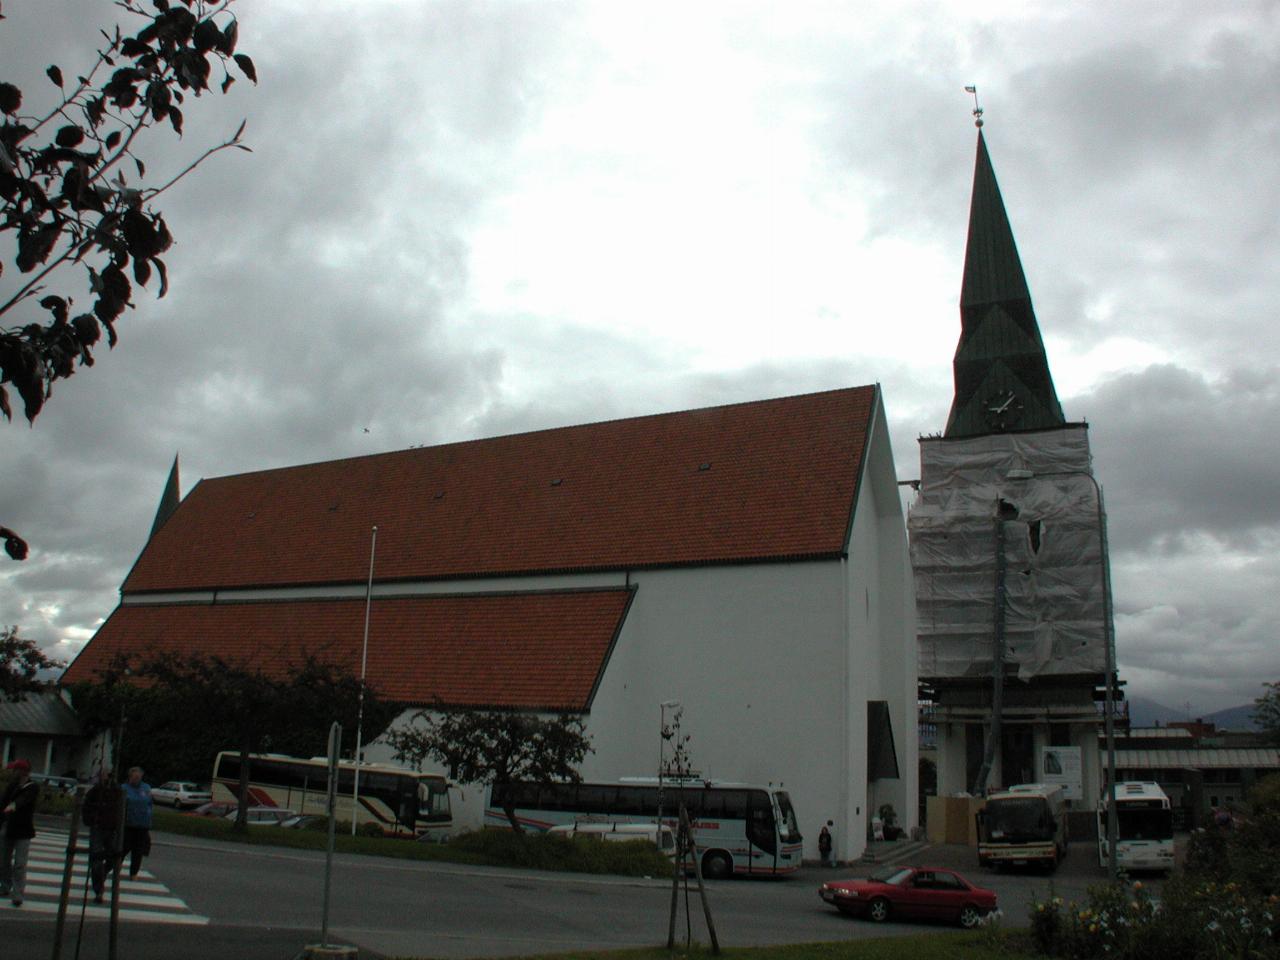 KPLU Viking Jazz: Lutheran Domkirke (Cathedral) in Molde - also used as concert venue